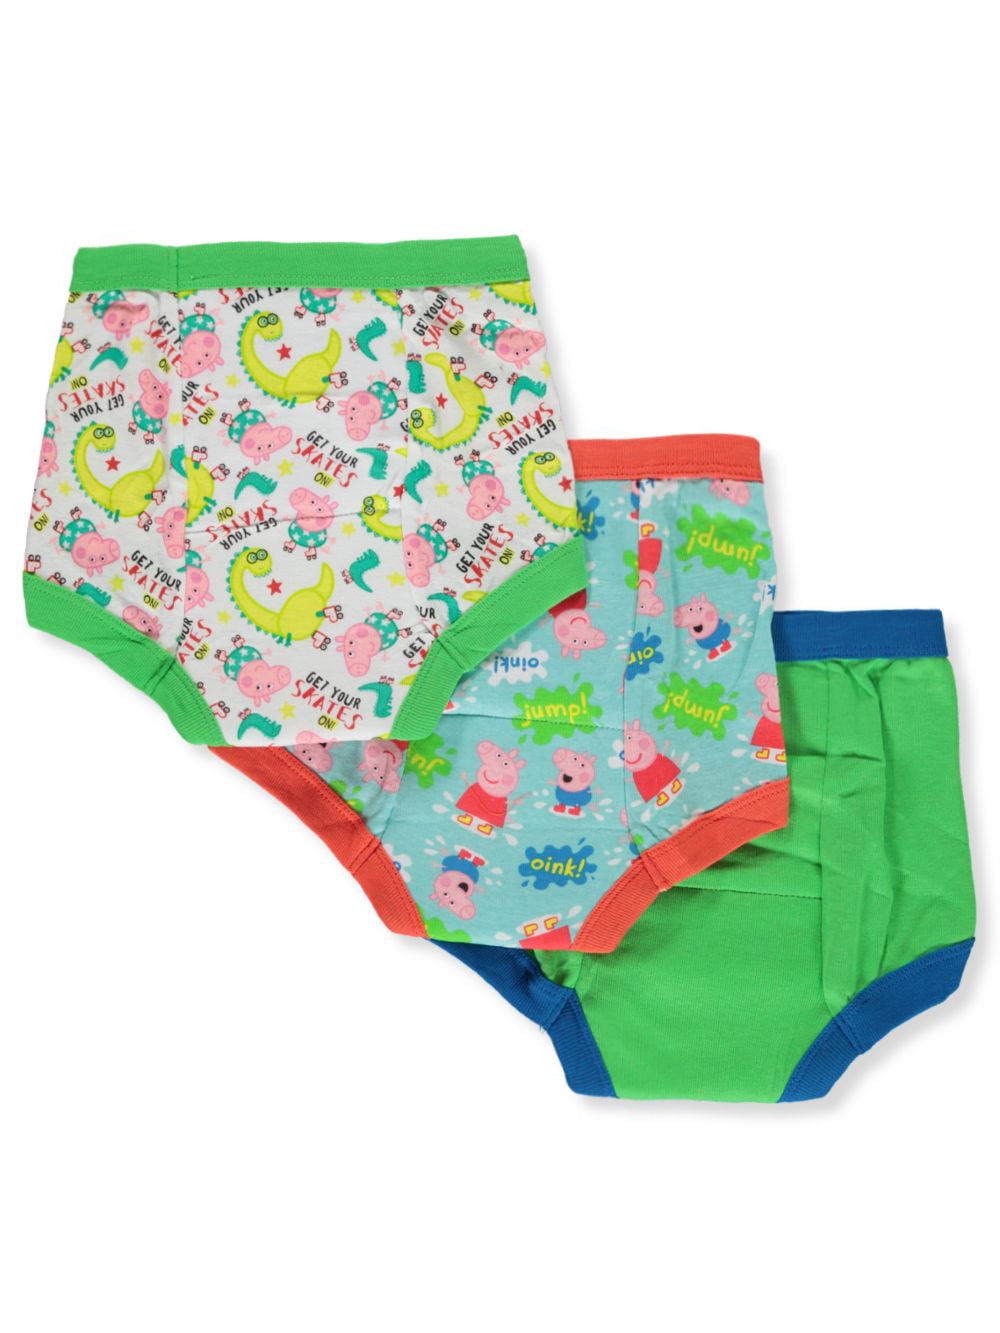 NEW partial package of boys toddler 4t Peppa Pig underwear briefs